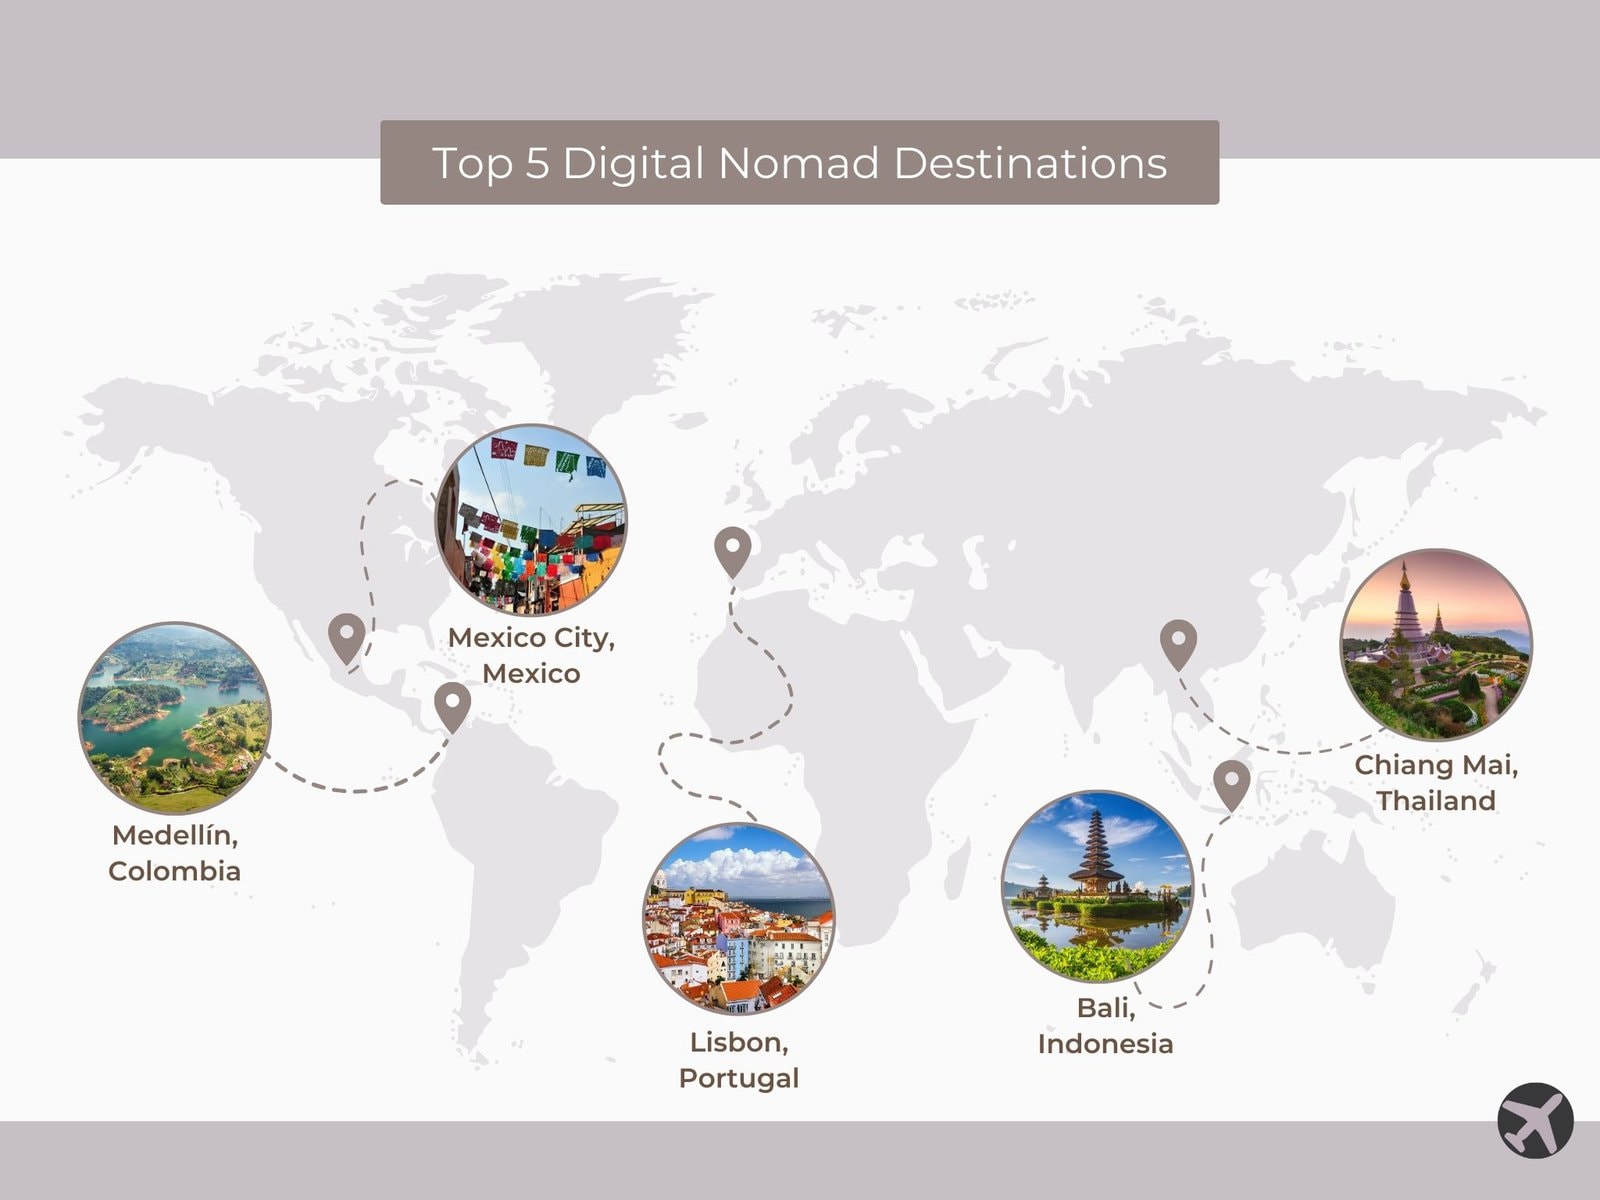 Custom world map graphic showing images around the world of the top 5 digital nomad cities: Mexico City, Mexico, Lisbon, Portugal, Medellín, Colombia, Bali, Indonesia, and Chiang Mai, Thailand.